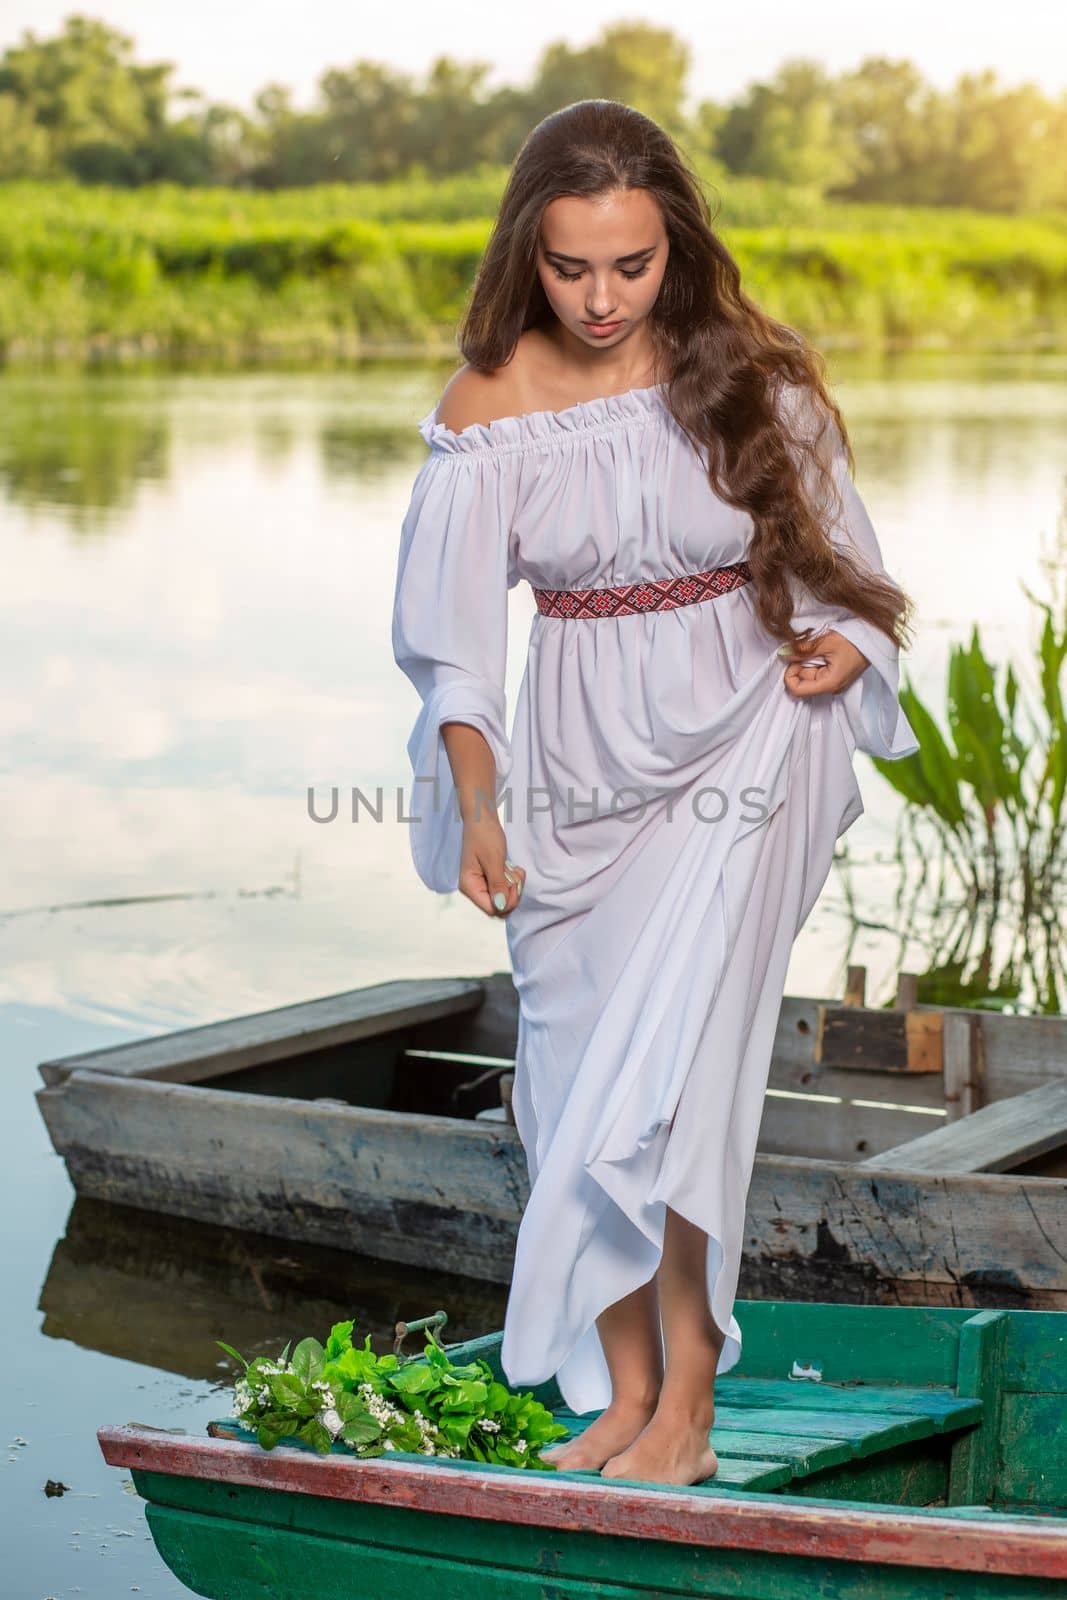 Young sexy woman on boat at sunset. The girl has a flower wreath on her head, relaxing and sailing on river. Fantasy art photography. by nazarovsergey